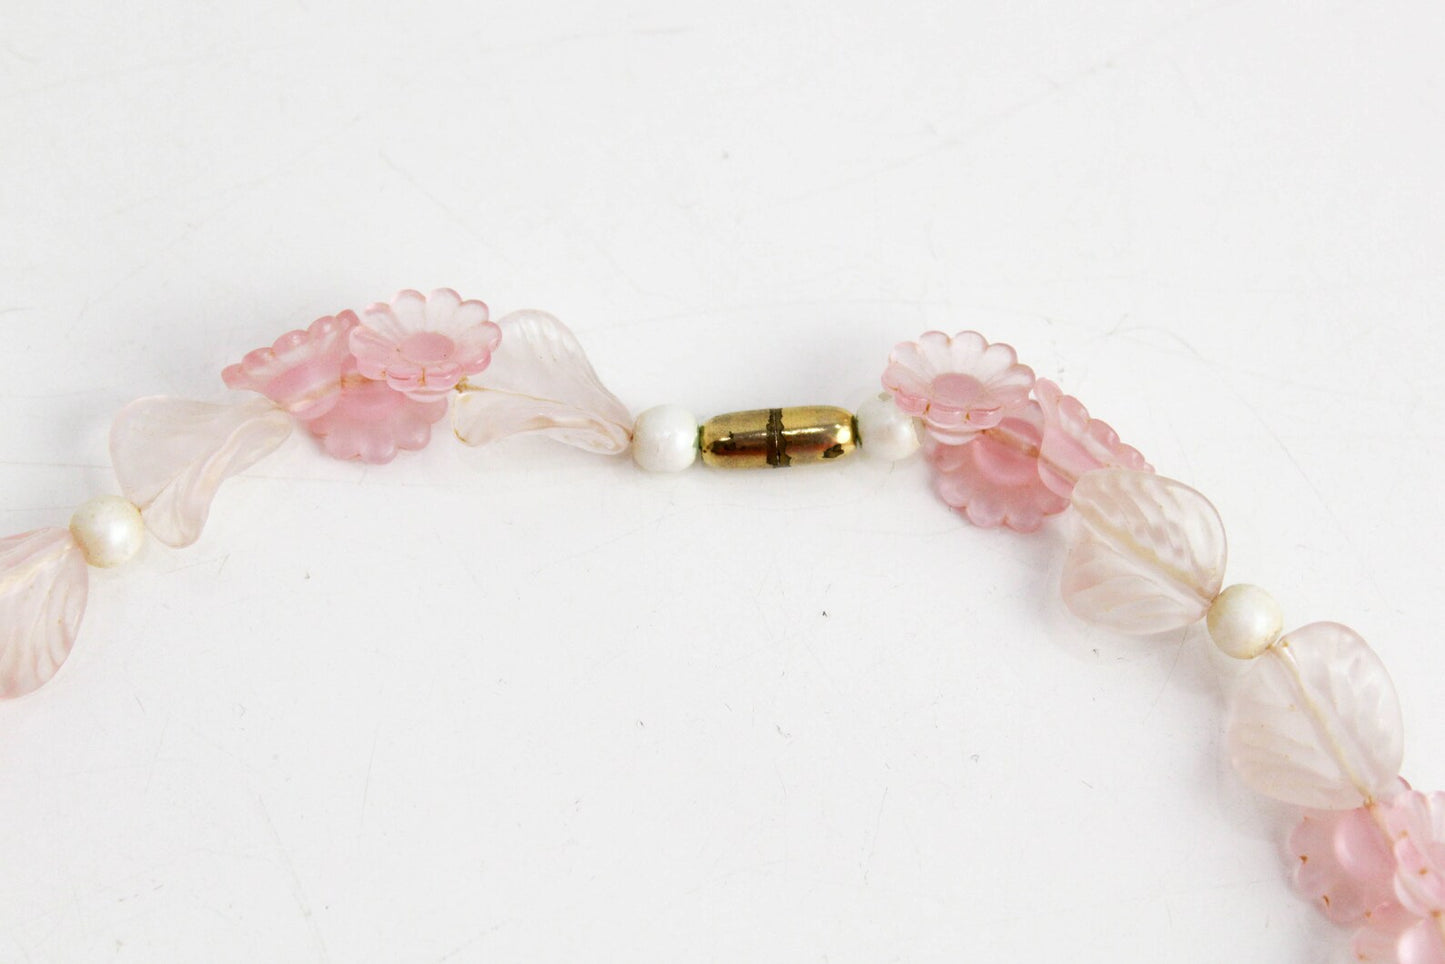 1980s Pale Pink Flower Necklace